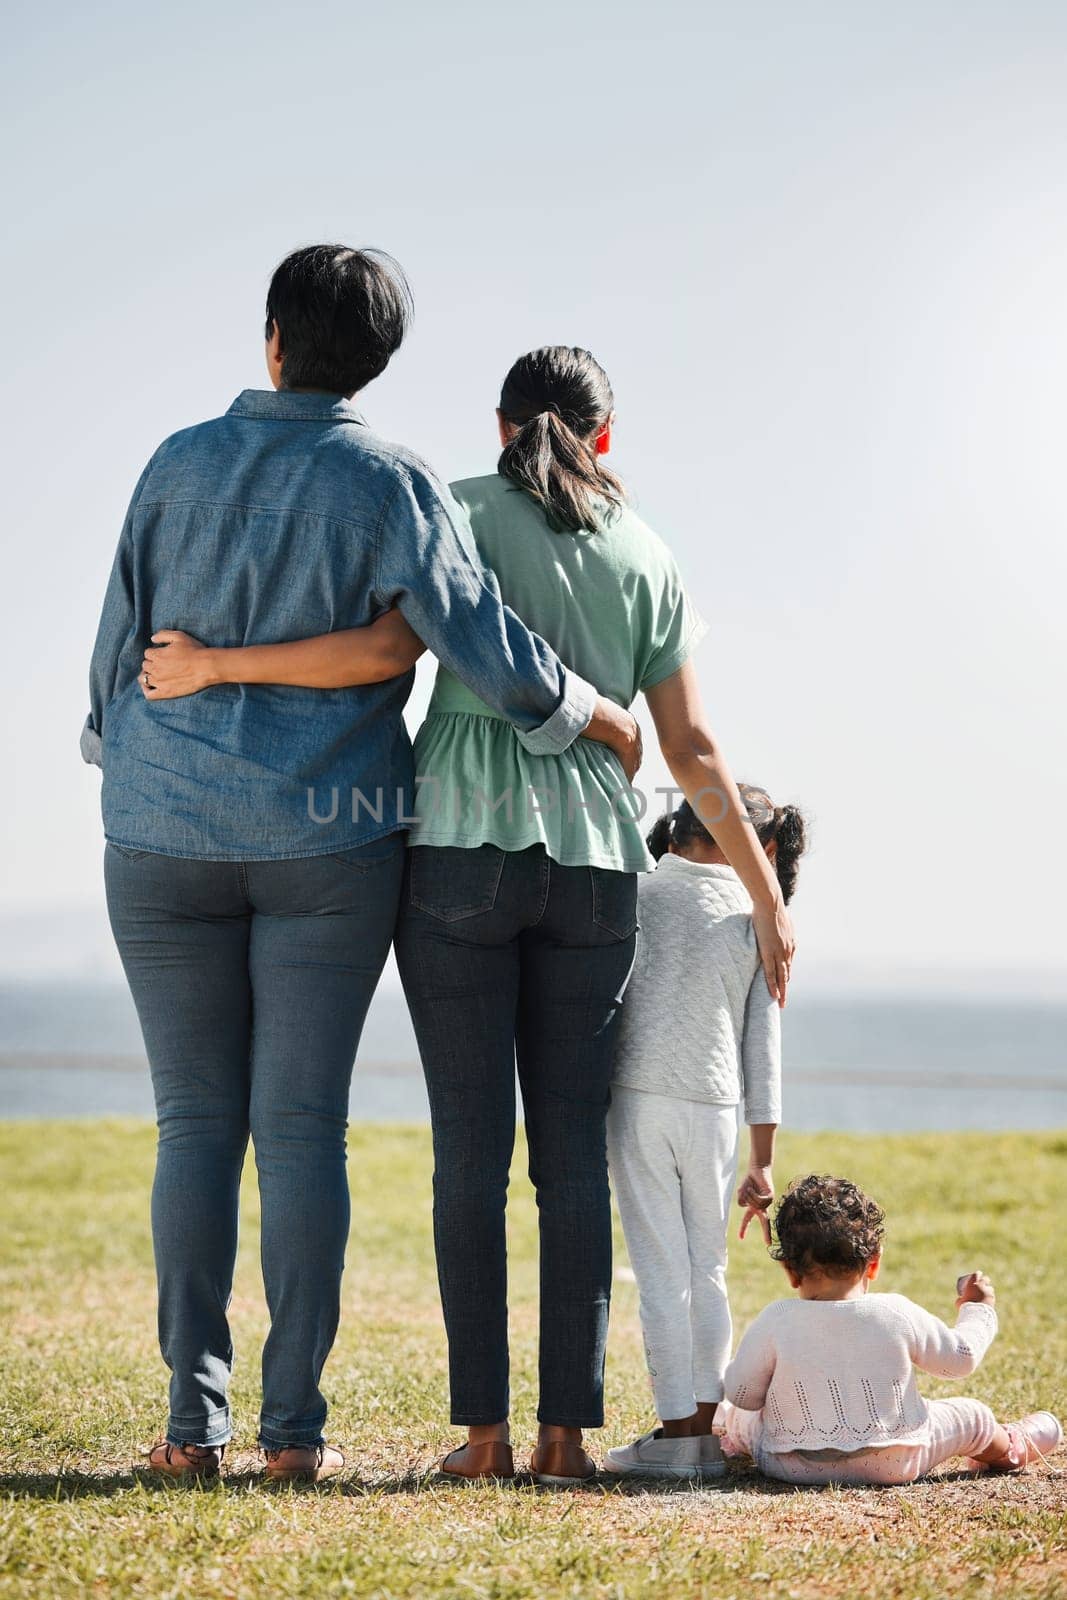 Park, nature and back view of family on grass outdoors with relatives spending quality time together. Love, support and caring grandma, mom and girl with baby bonding together with scenic ocean view